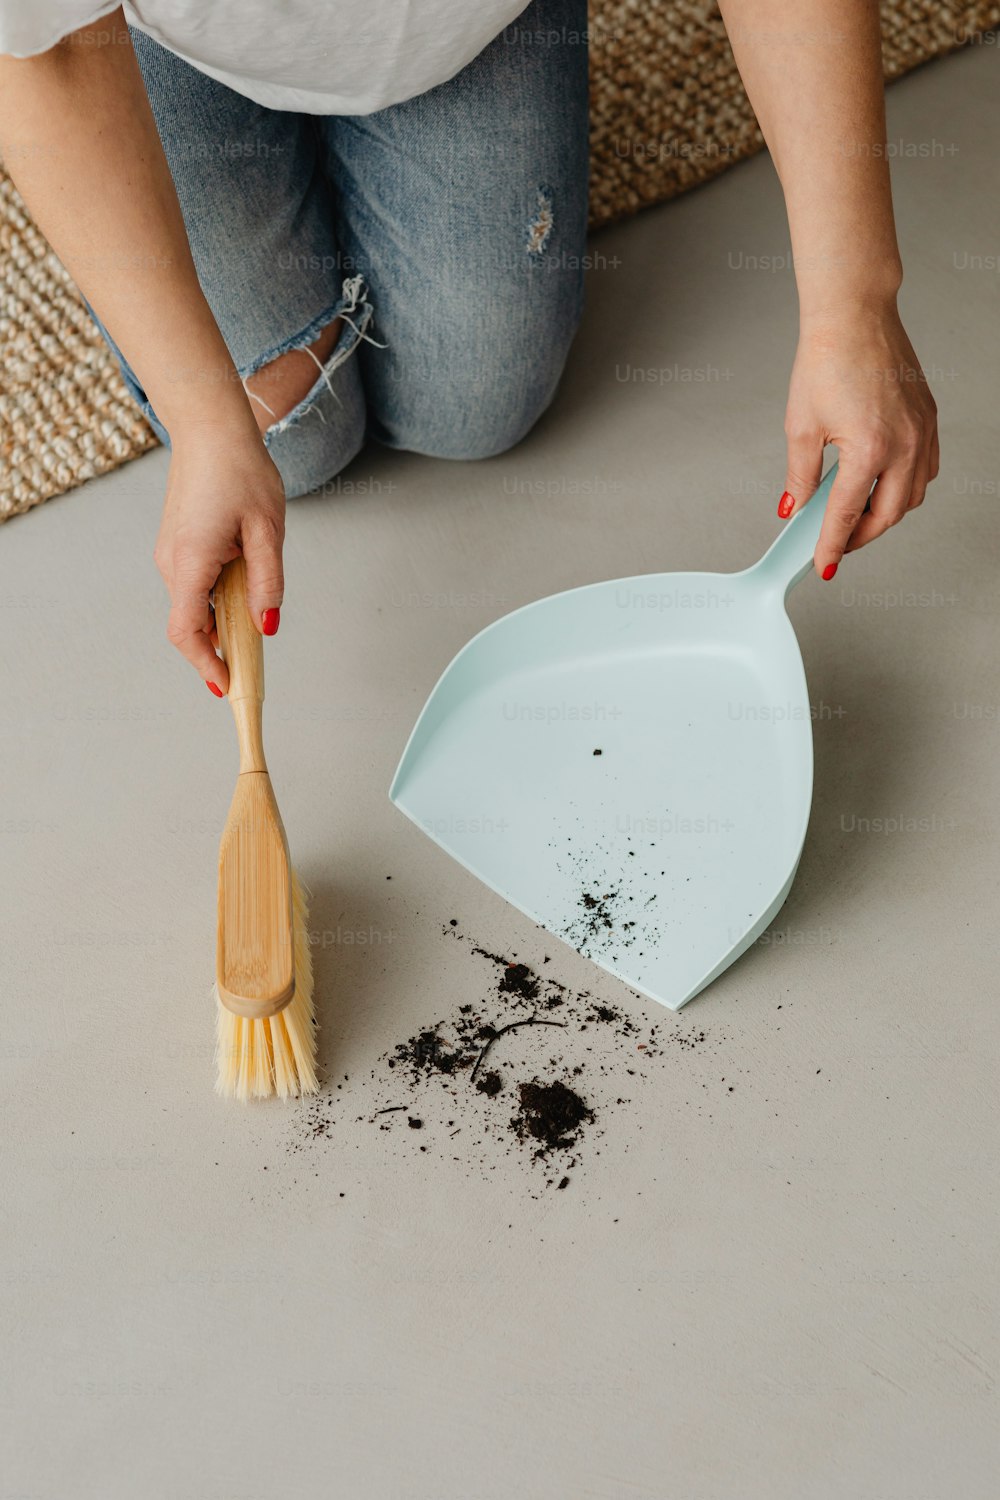 a woman scooping dirt off of a floor with a spatula